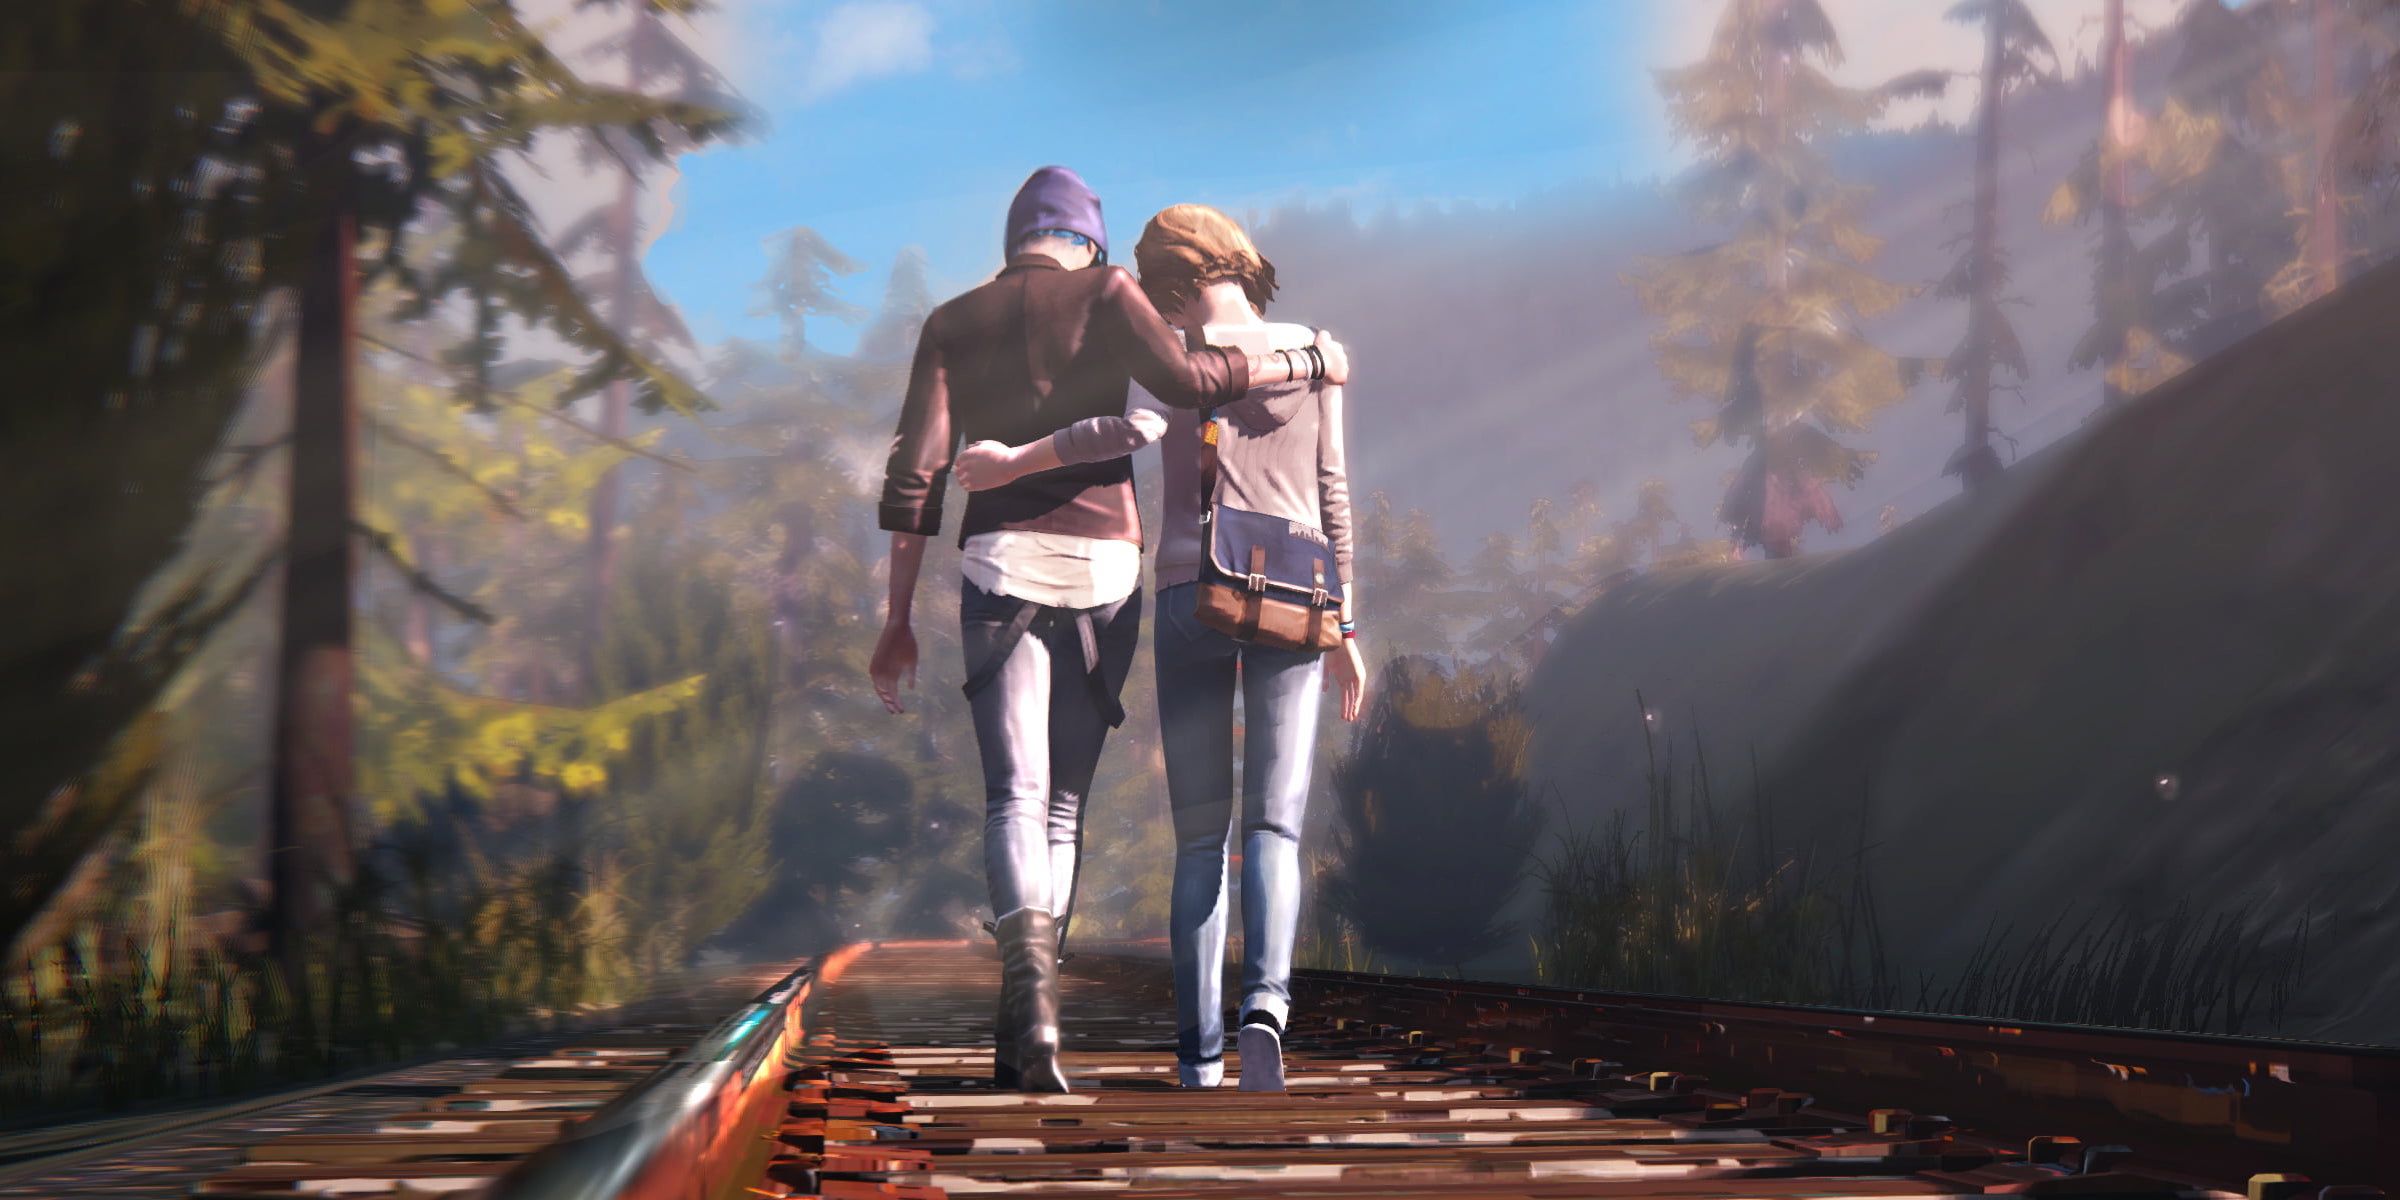 Chloe and Max walking along a railway track in the middle of a forest